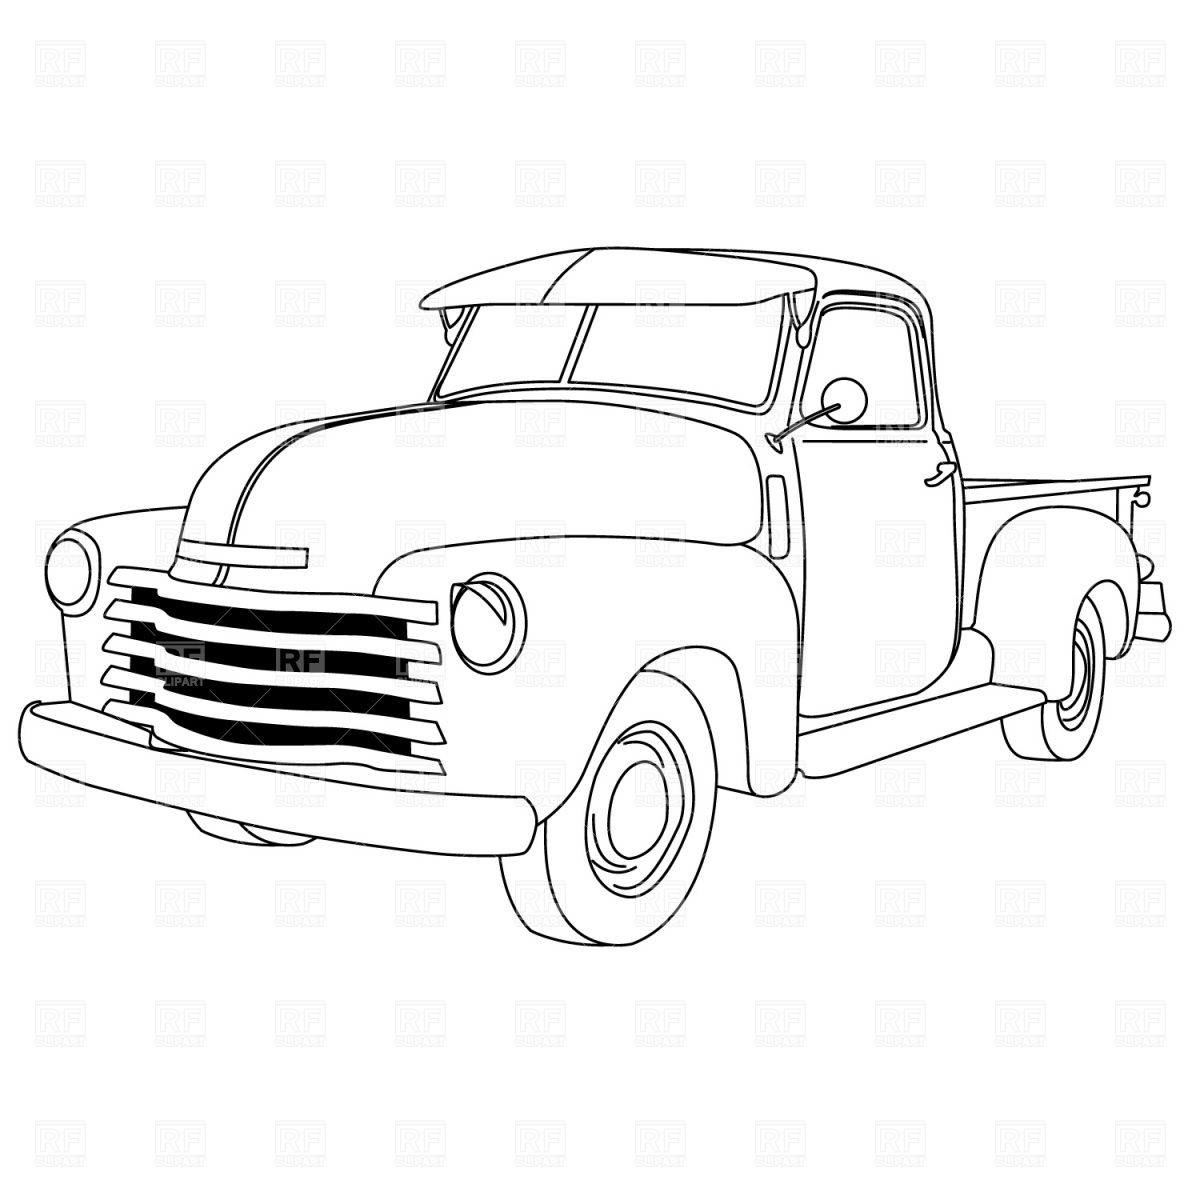 Chevy Truck Coloring Pages at GetColorings.com | Free printable